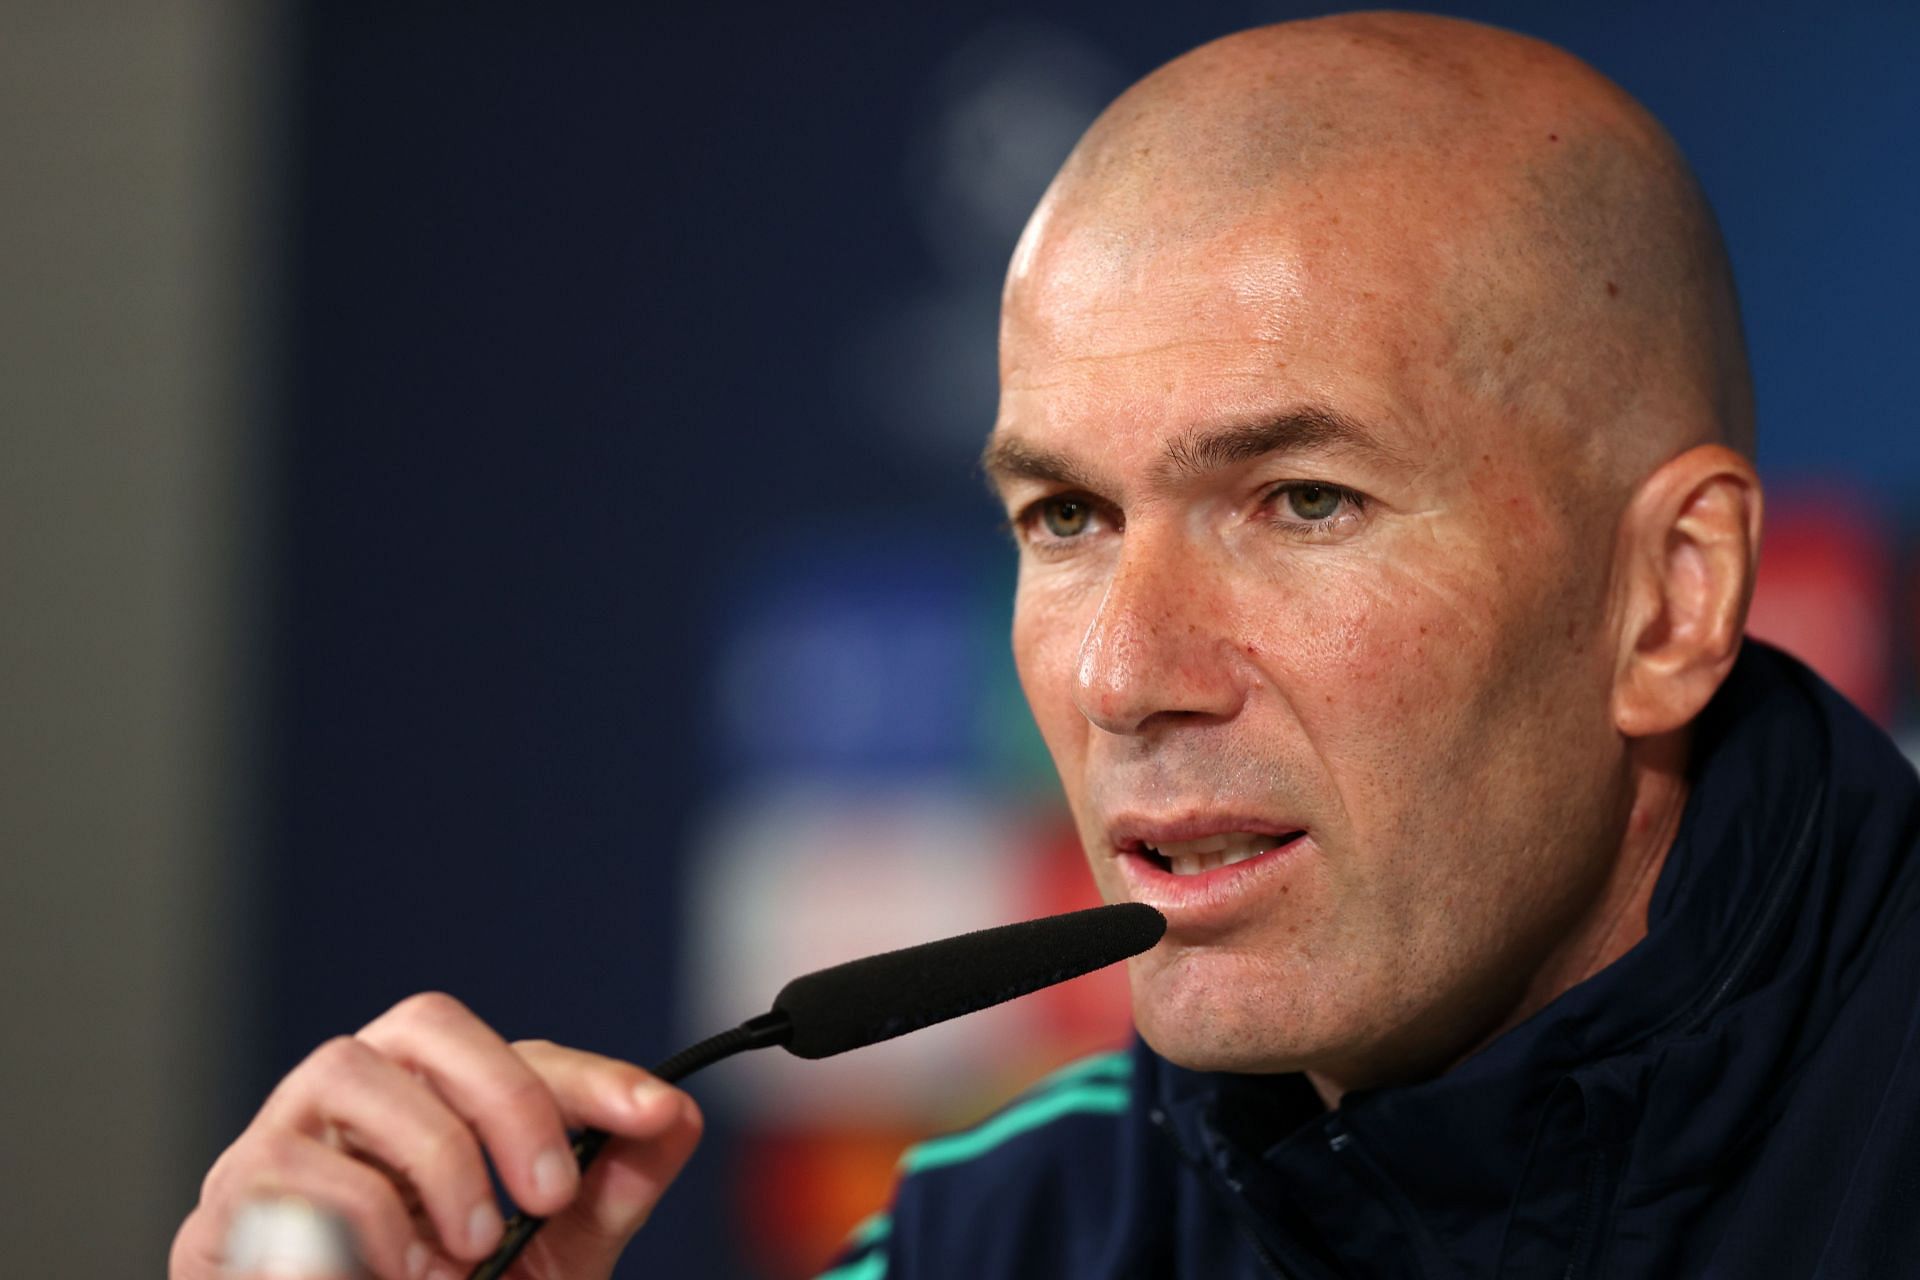 Zidane (in pic) lavished praise on the PSG frontman.